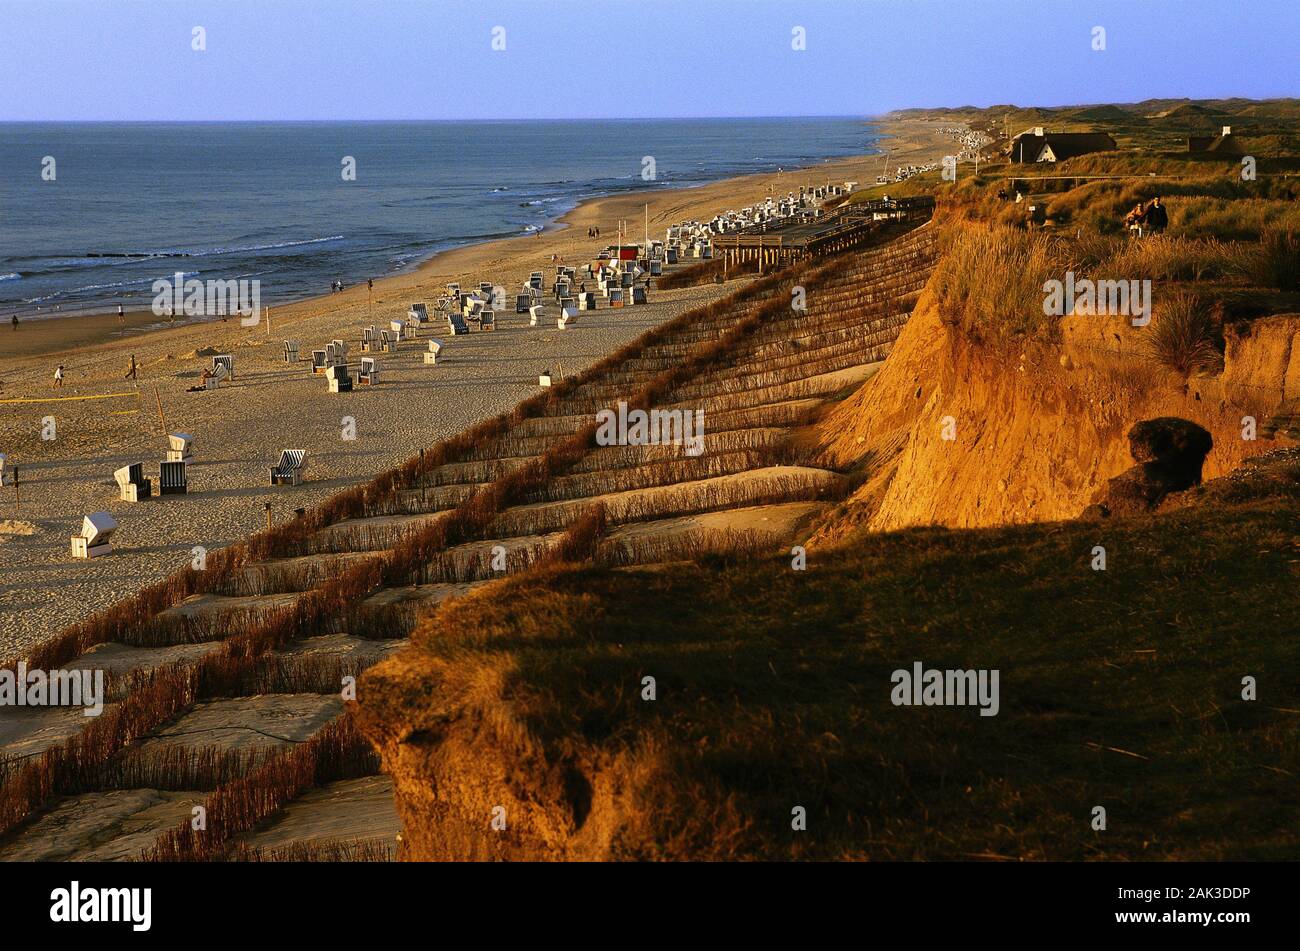 View from the Red Cliff to the beach of Kampen on the island of Sylt. The cliff has an altitude of 30 meters and is composed of red boulder clay that Stock Photo